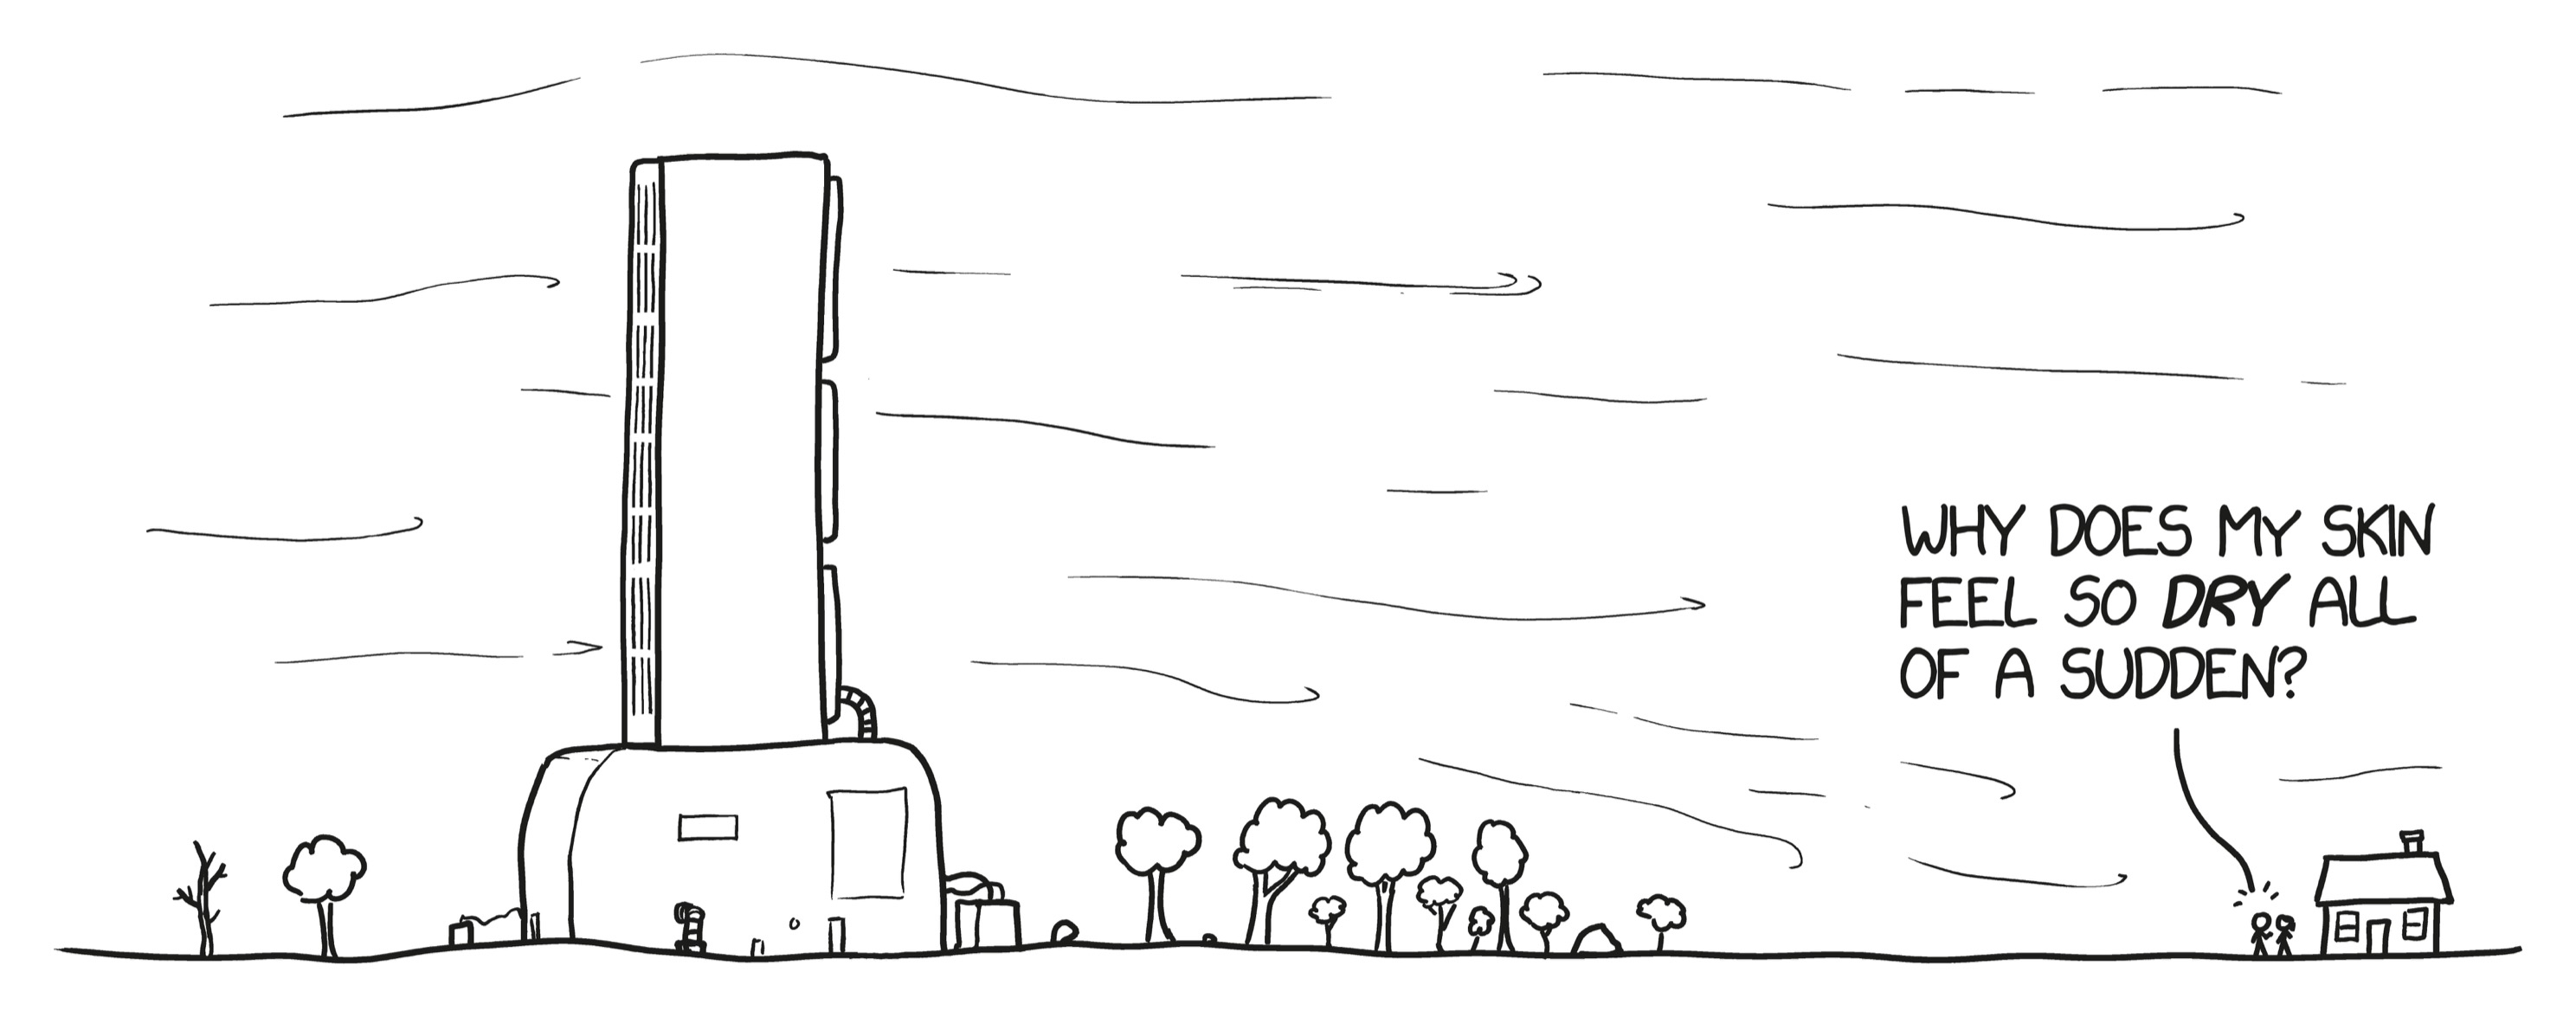 Illustration of a giant humidifier towering over trees, as well as a house downwind. Next to the house, a stick figure says, “Why does my skin feel so dry all of a sudden?”